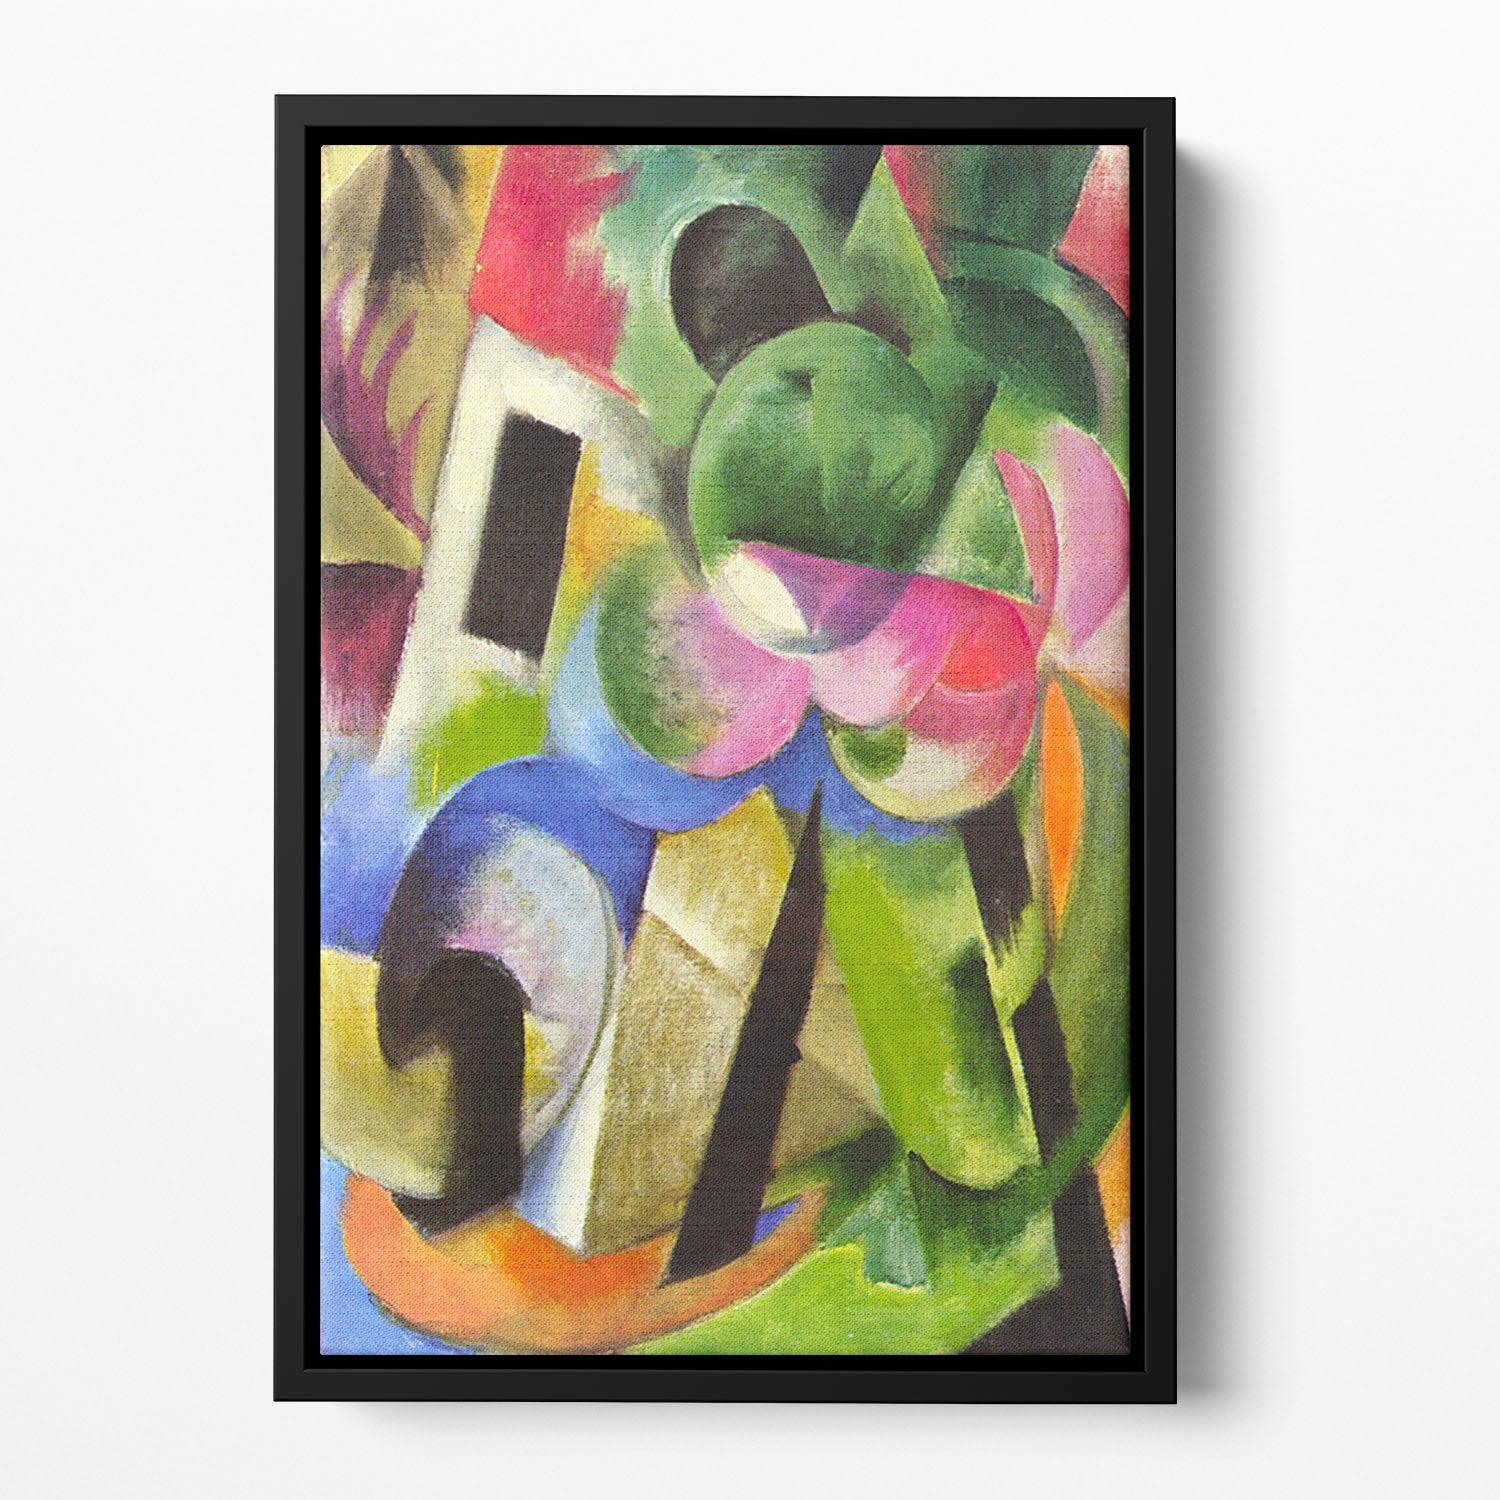 House with trees by Franz Marc Floating Framed Canvas